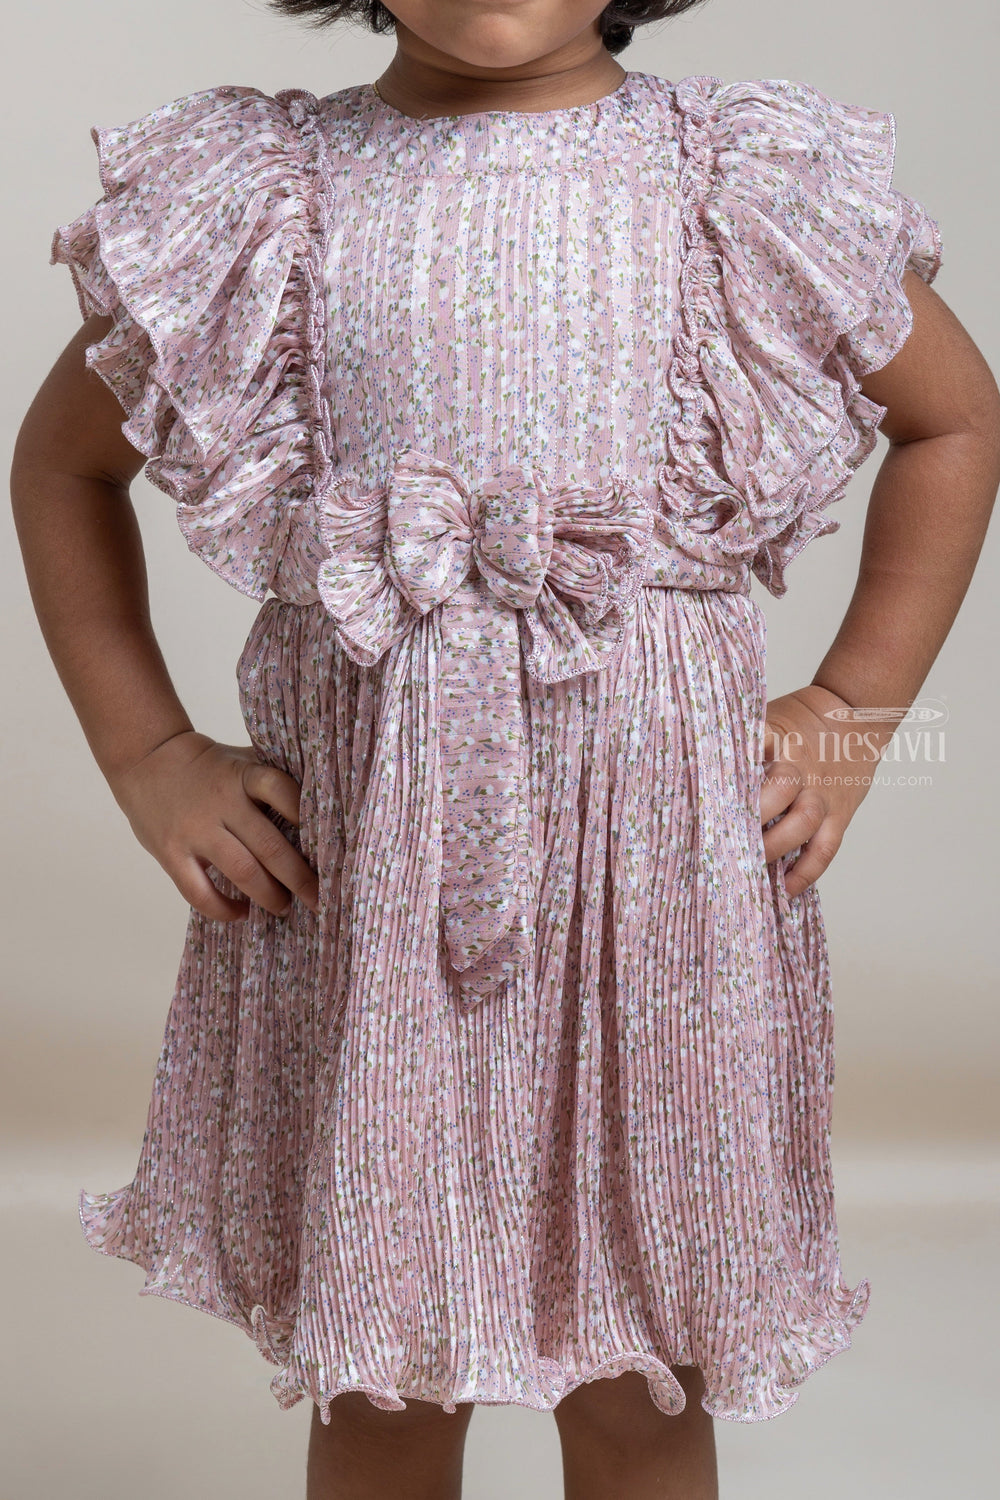 The Nesavu Baby Fancy Frock Pretty Brown Floral Printed Ruffled Baby Frock For Girls Nesavu Fancy Girls Dresses | Latest Girls Frock Collection | The Nesavu